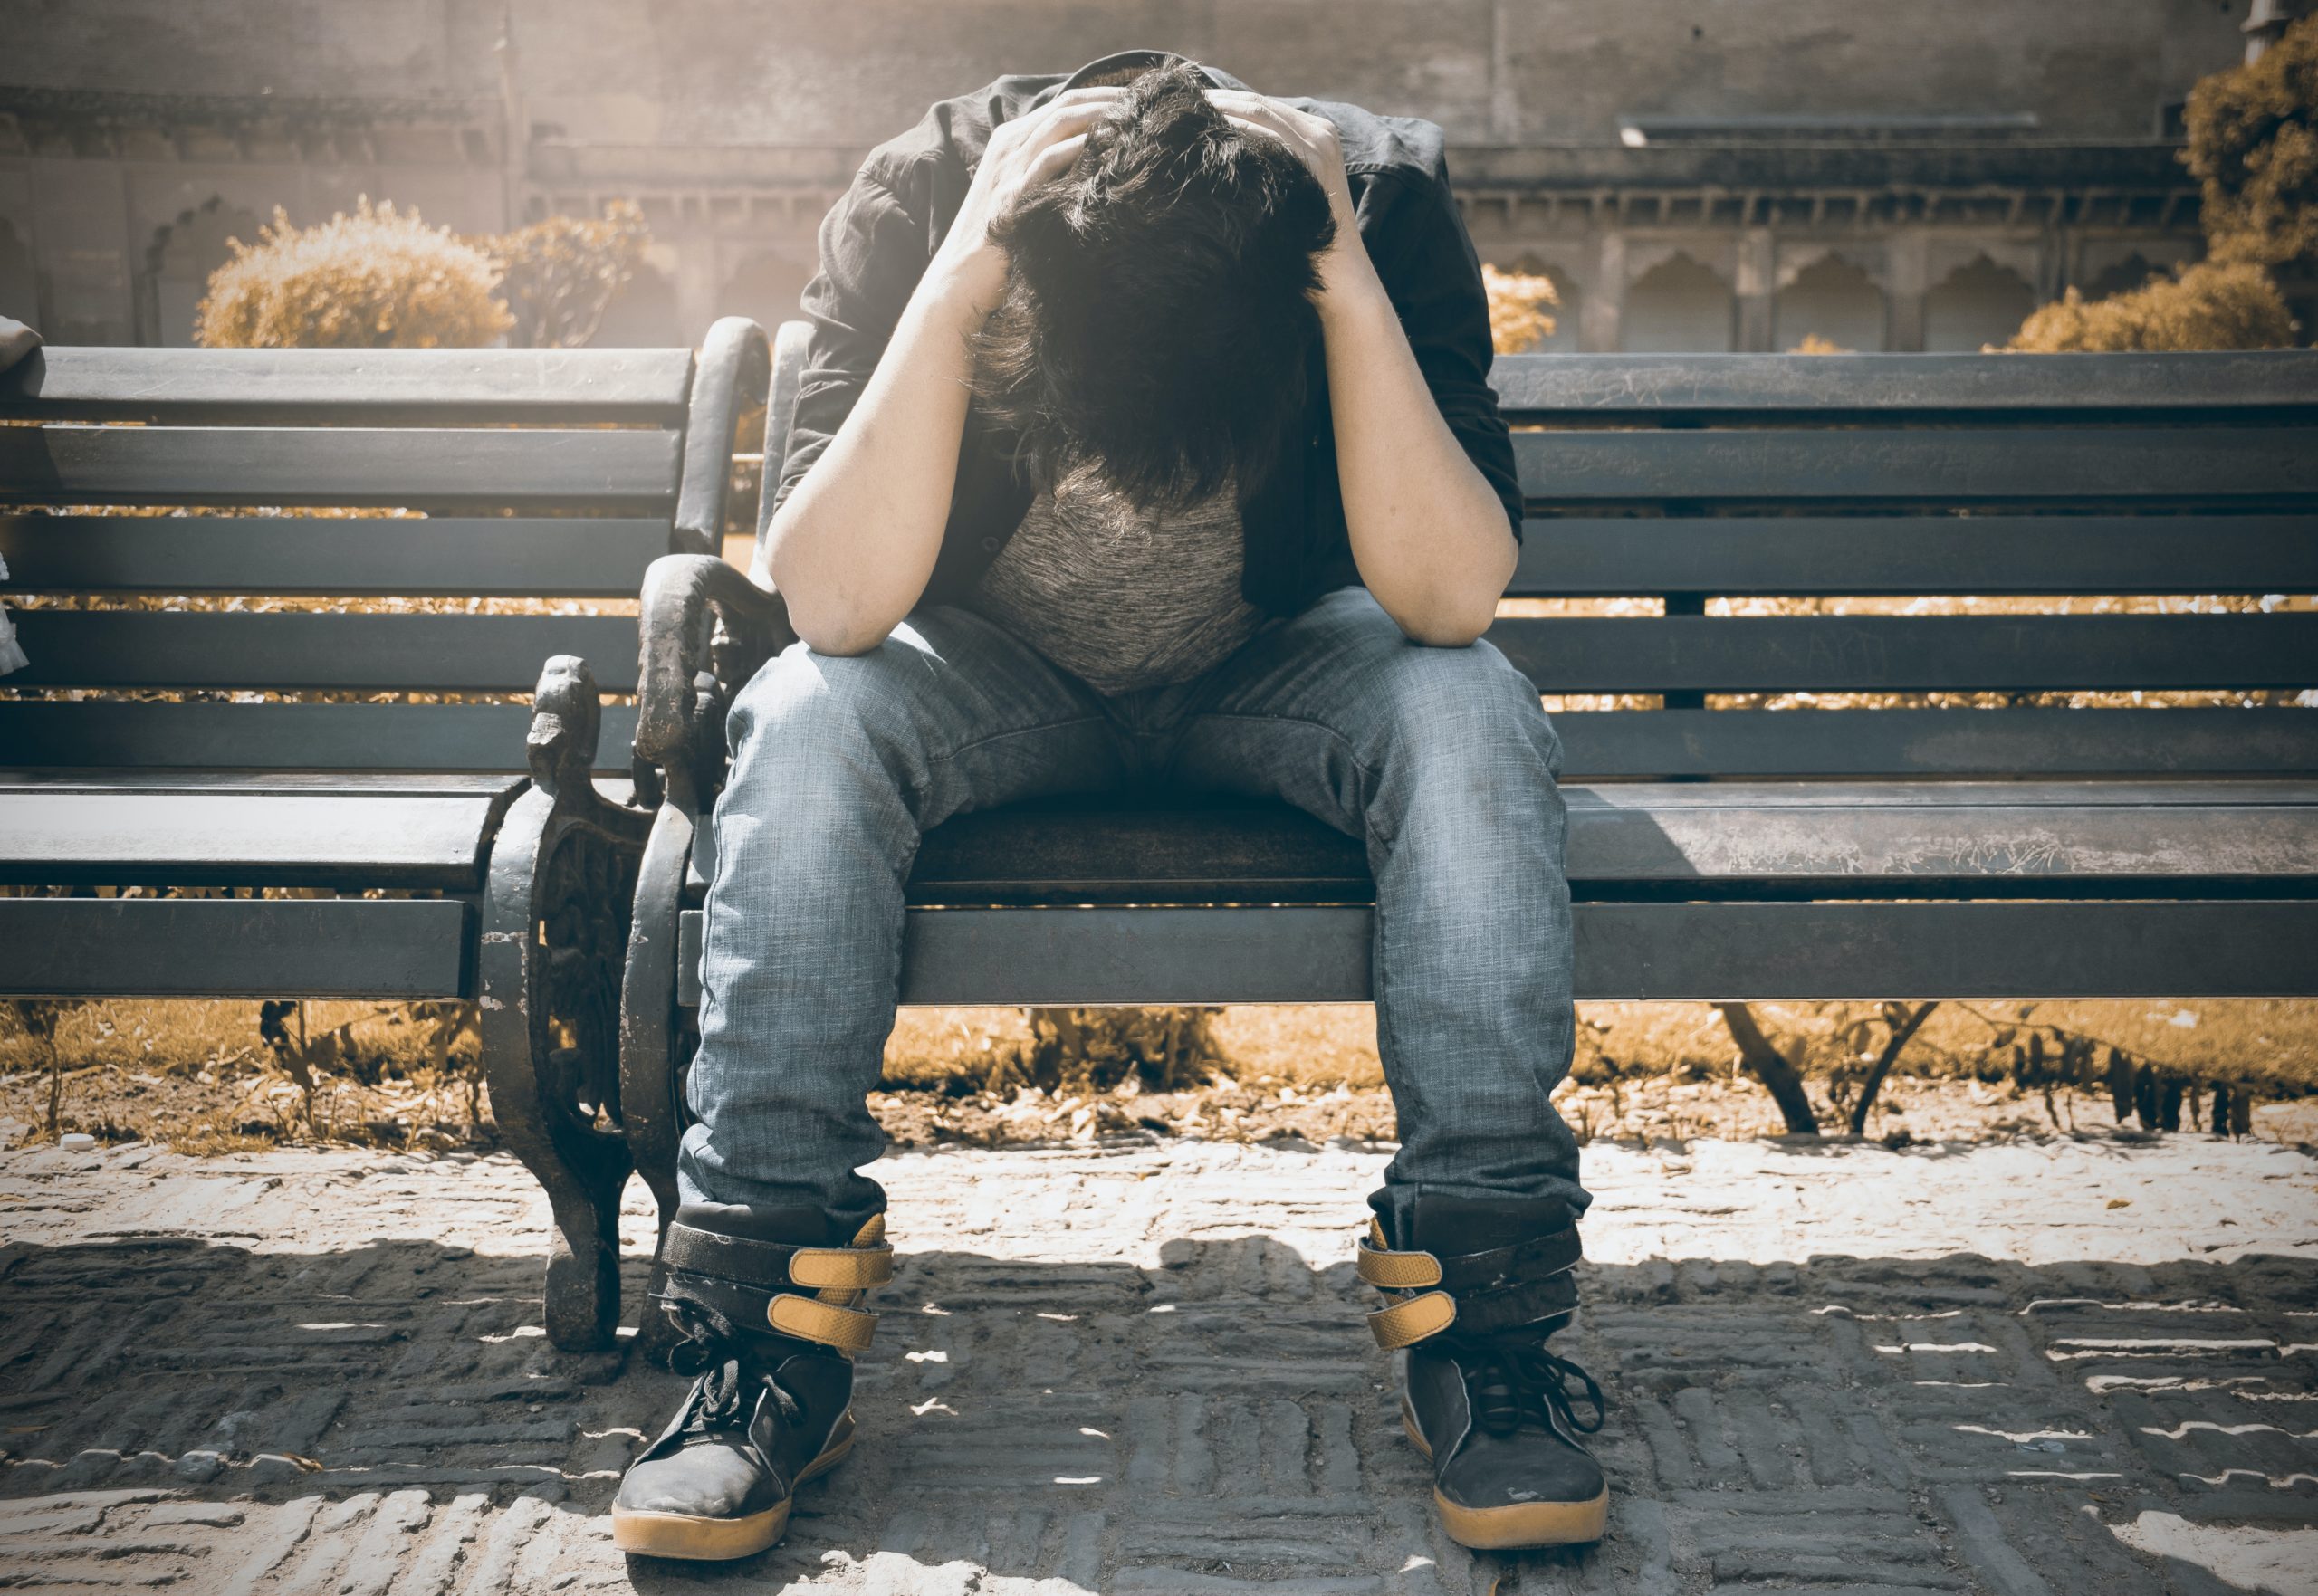 Student sitting on a park bench stressed out with his head in his hands